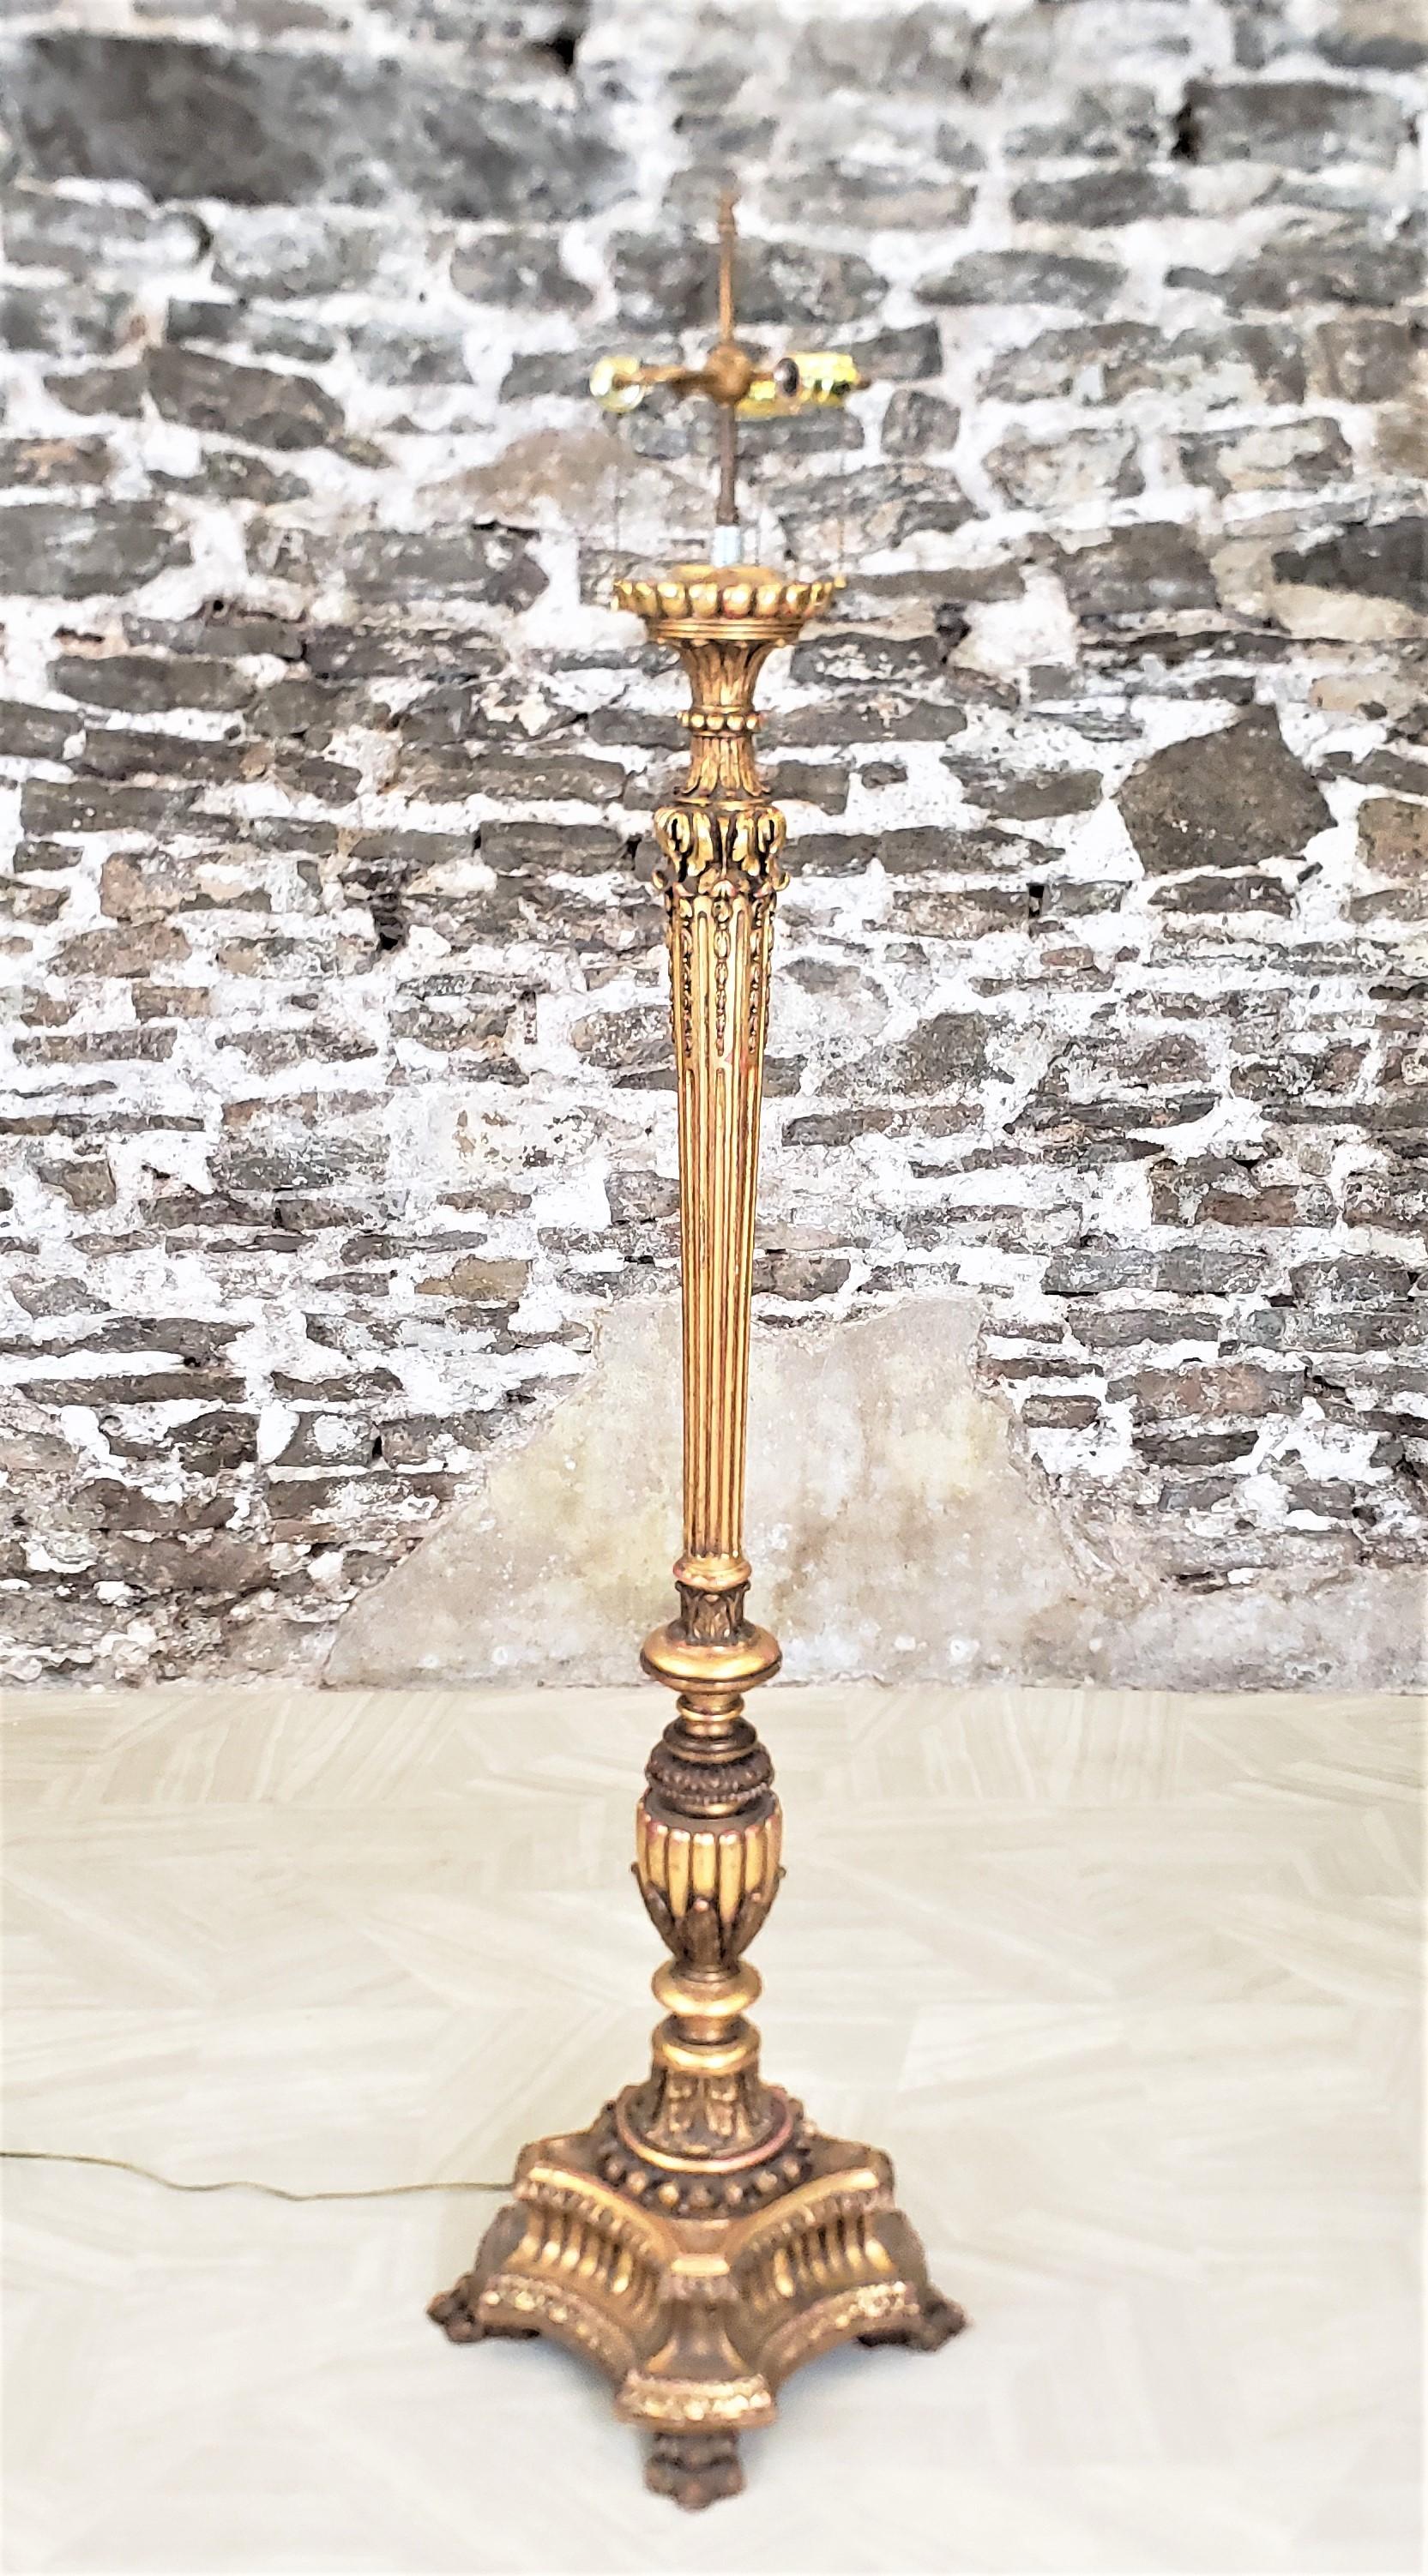 Antique Italian Florentine Hand-Carved & Gilt Finished Floor Lamp & Shade For Sale 2